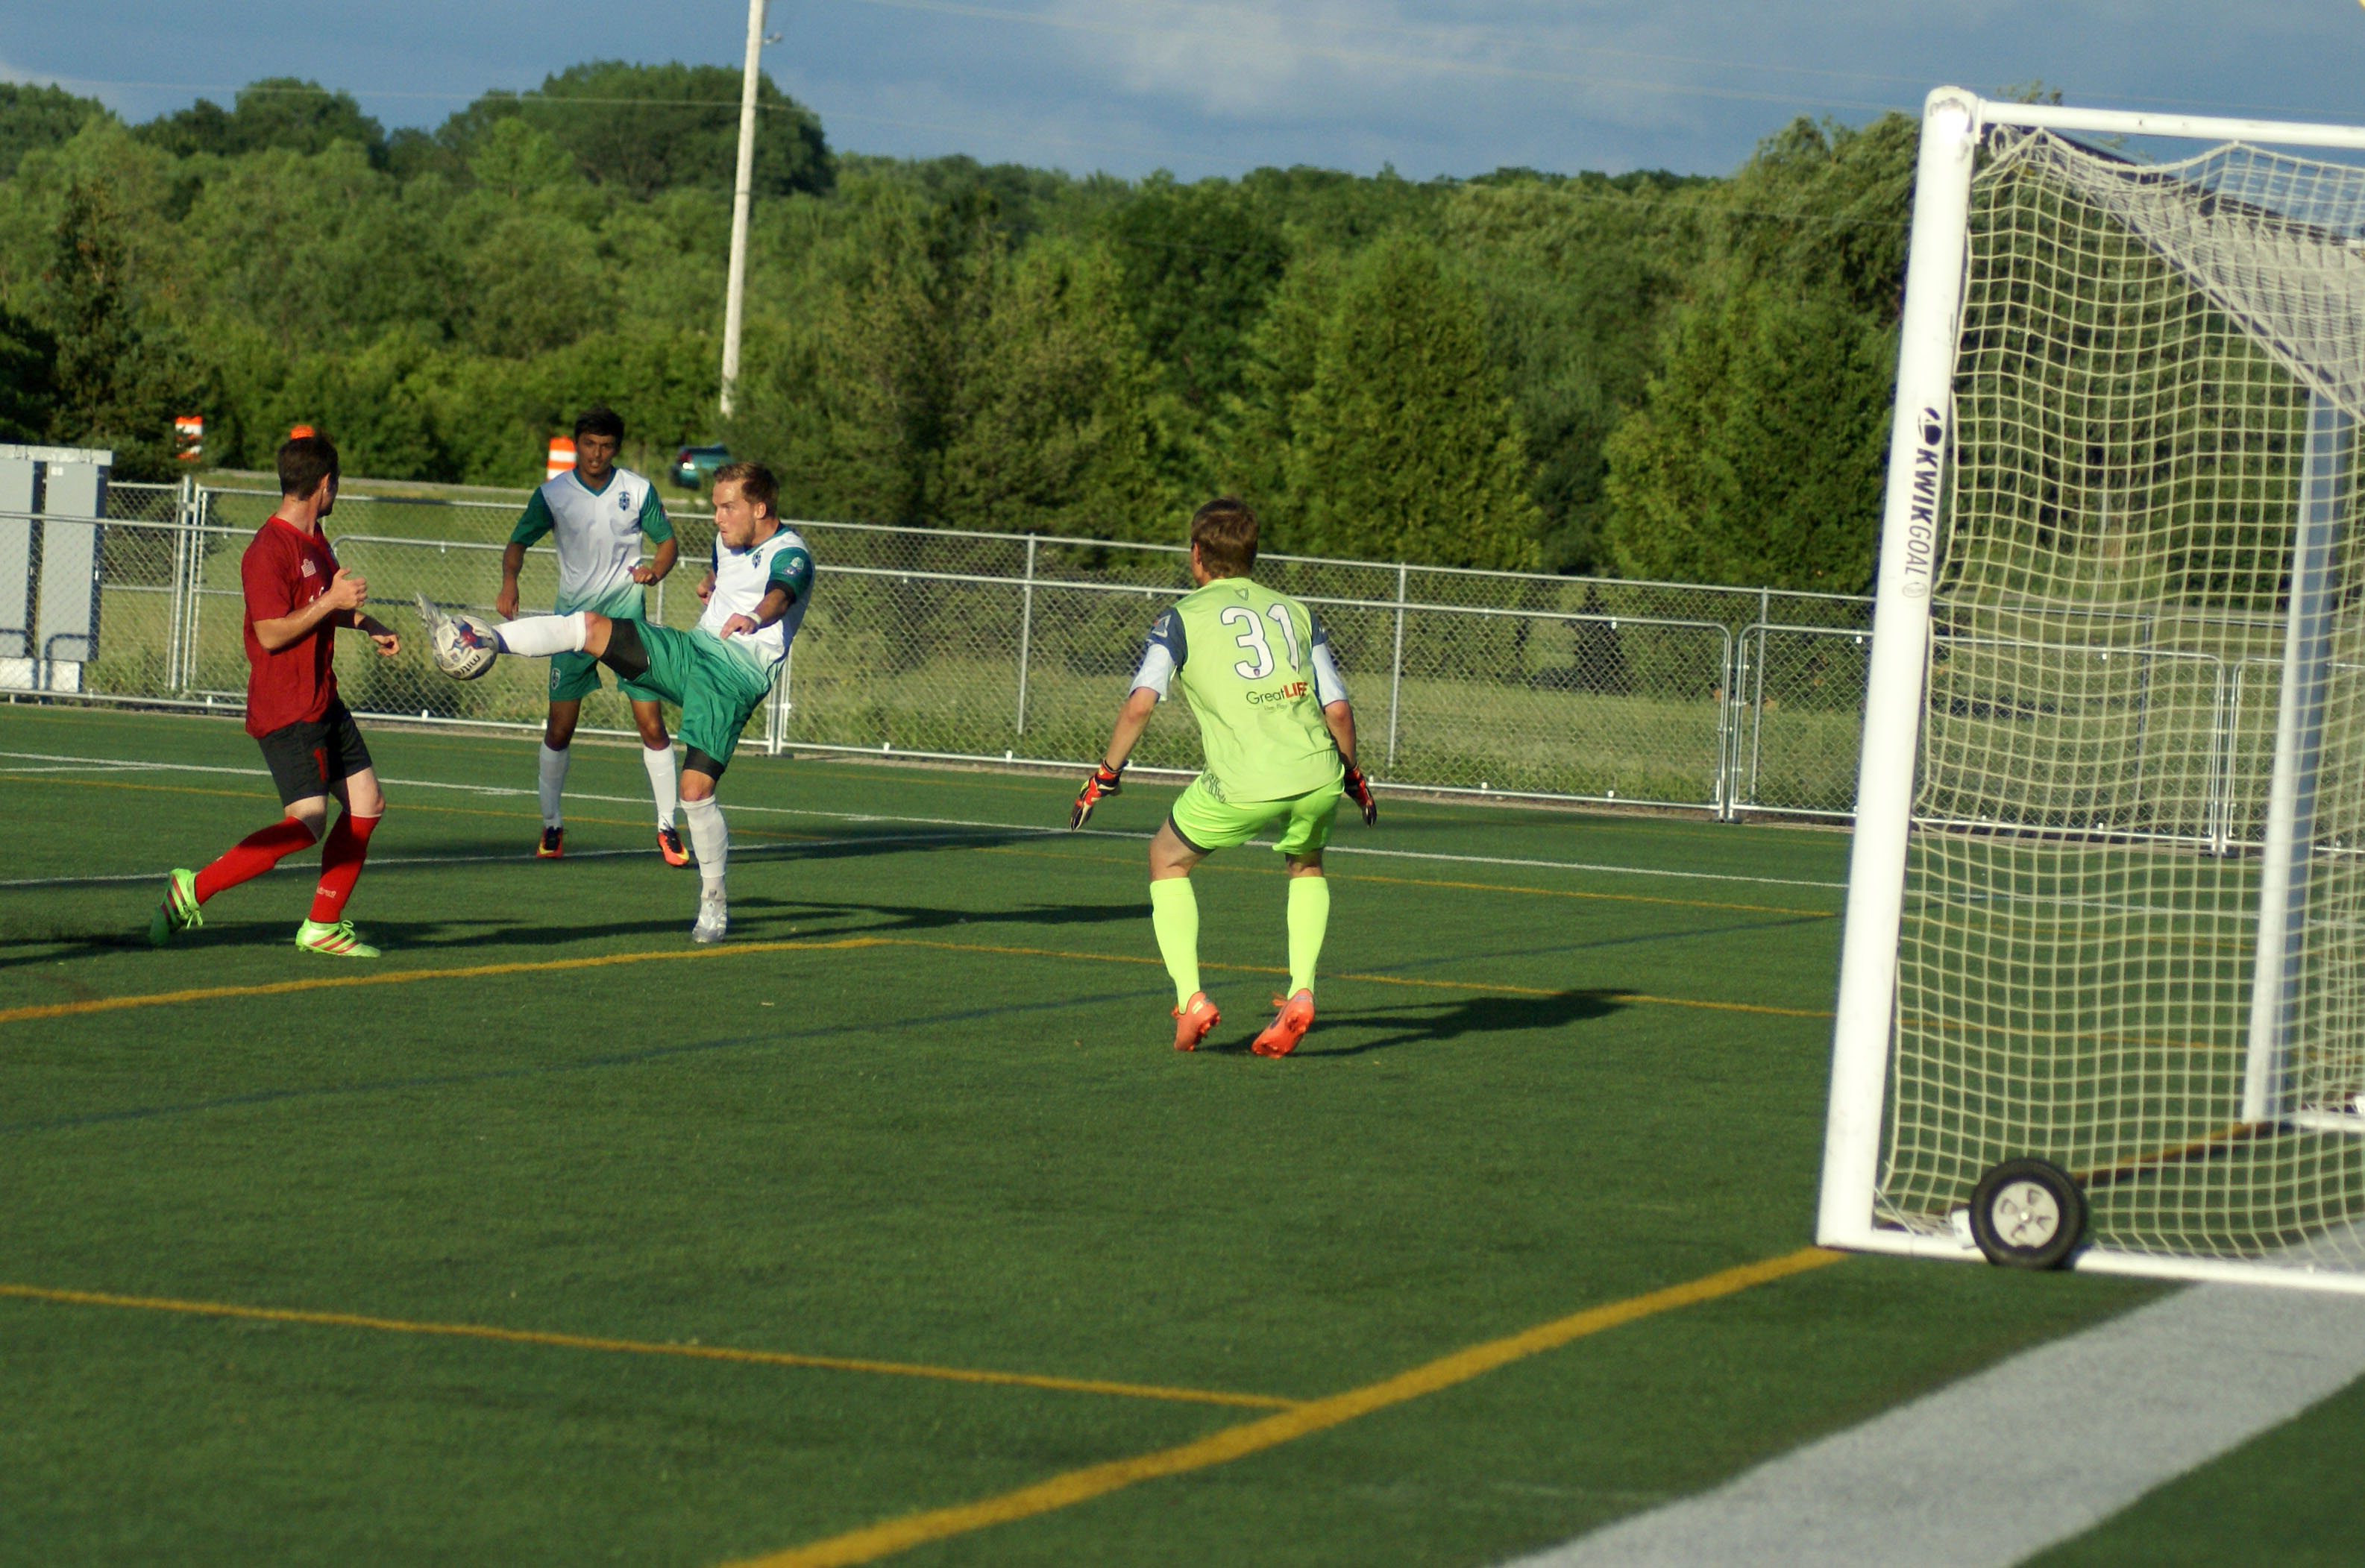 Med City Top of NPSL North Amid Plethora of Goals, Red Cards